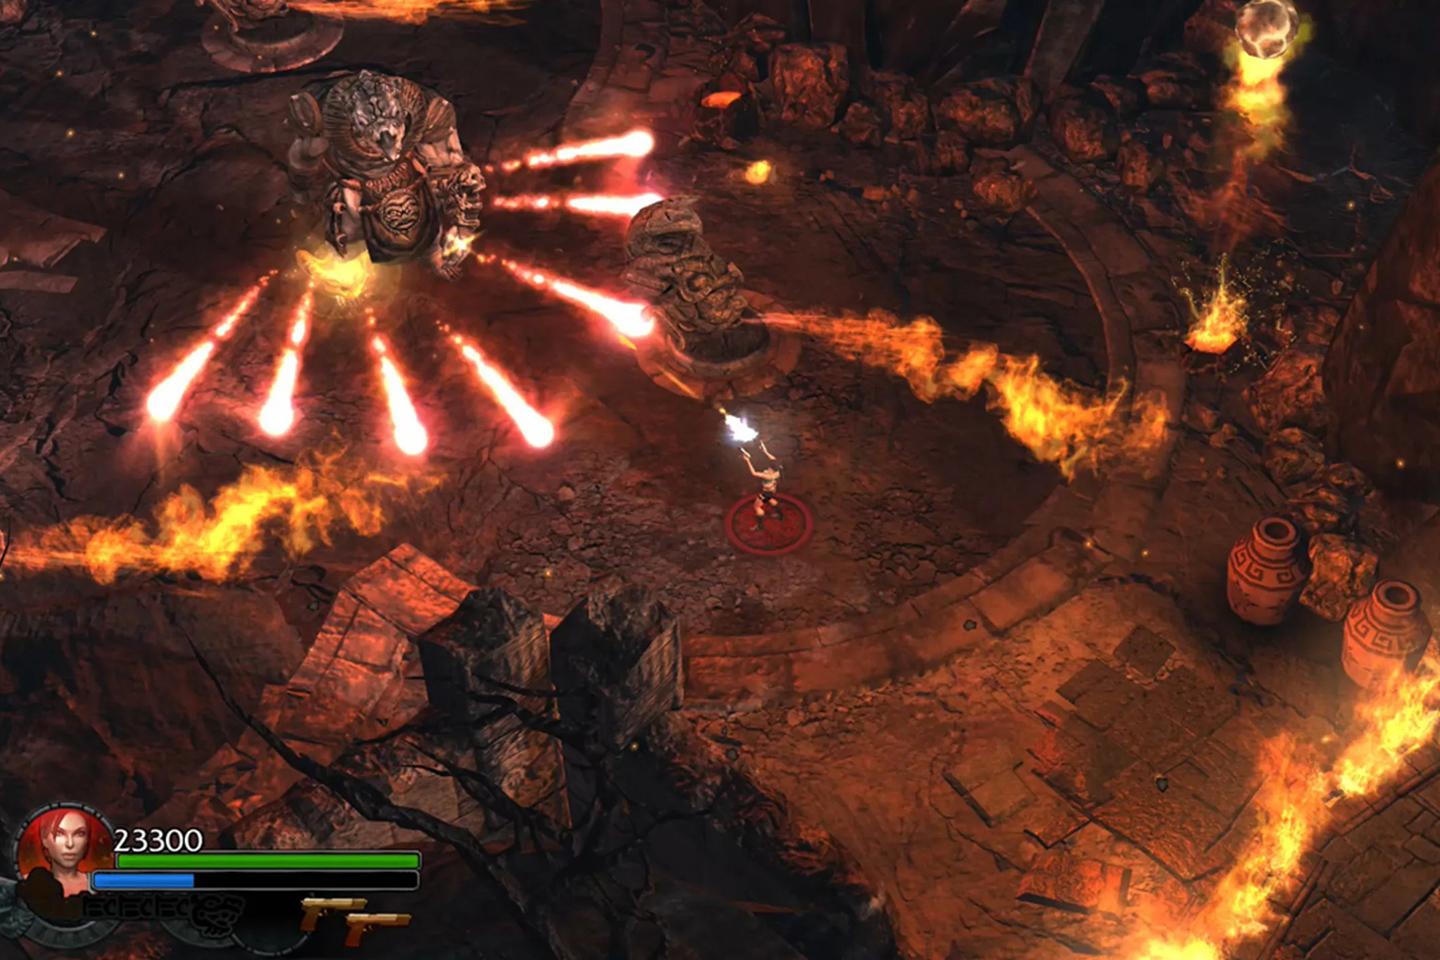 A dynamic screenshot from a Tomb Raider game displaying a character avoiding a fiery trap with multiple flame jets and projectiles in an underground cavern setting.